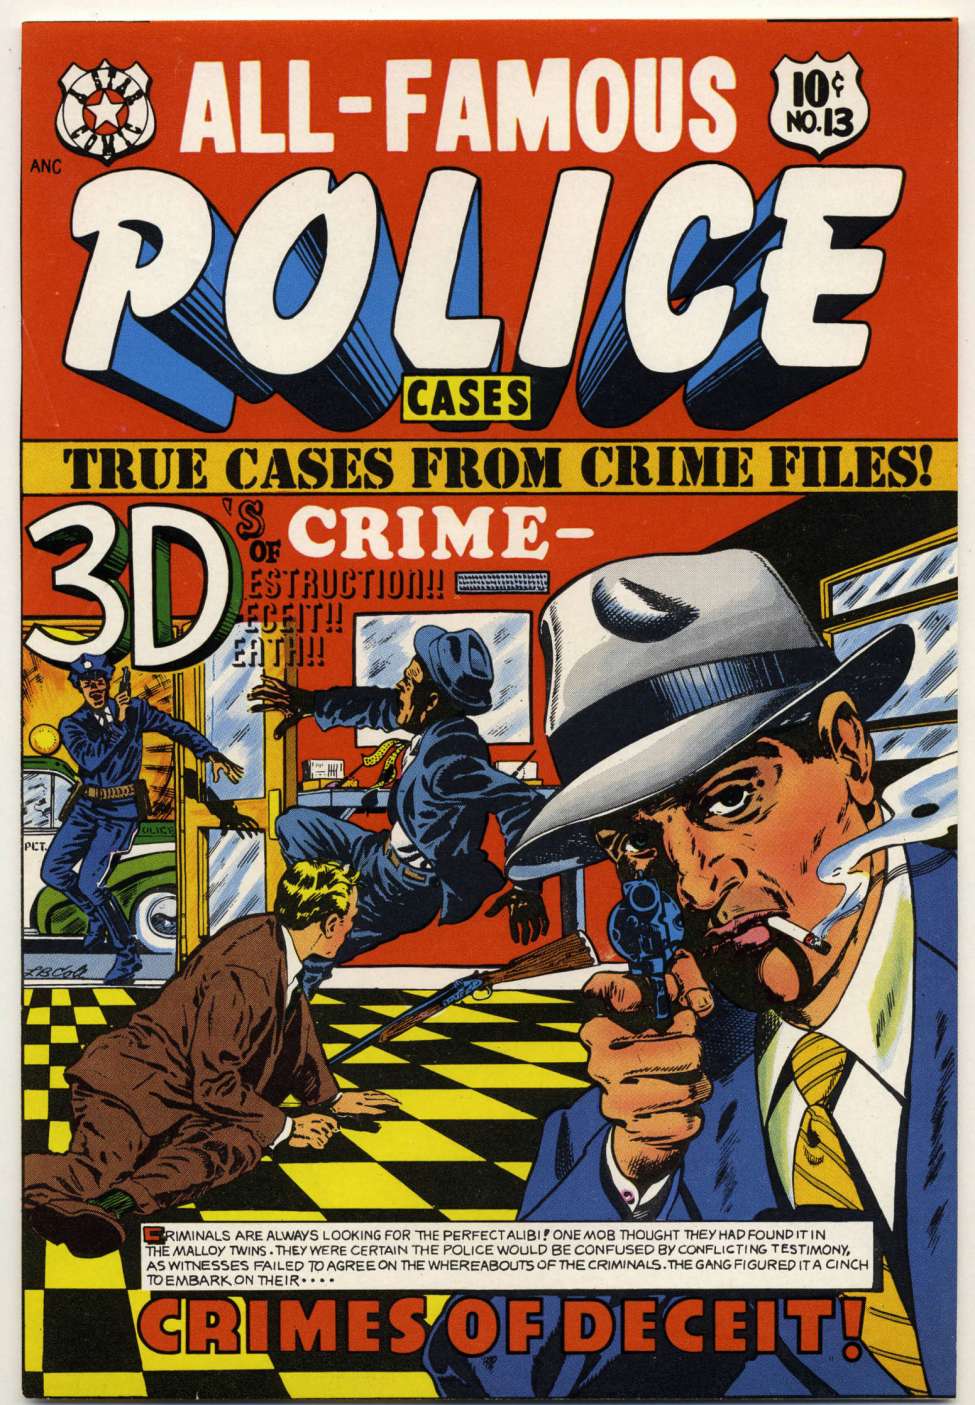 Book Cover For All-Famous Police Cases 13